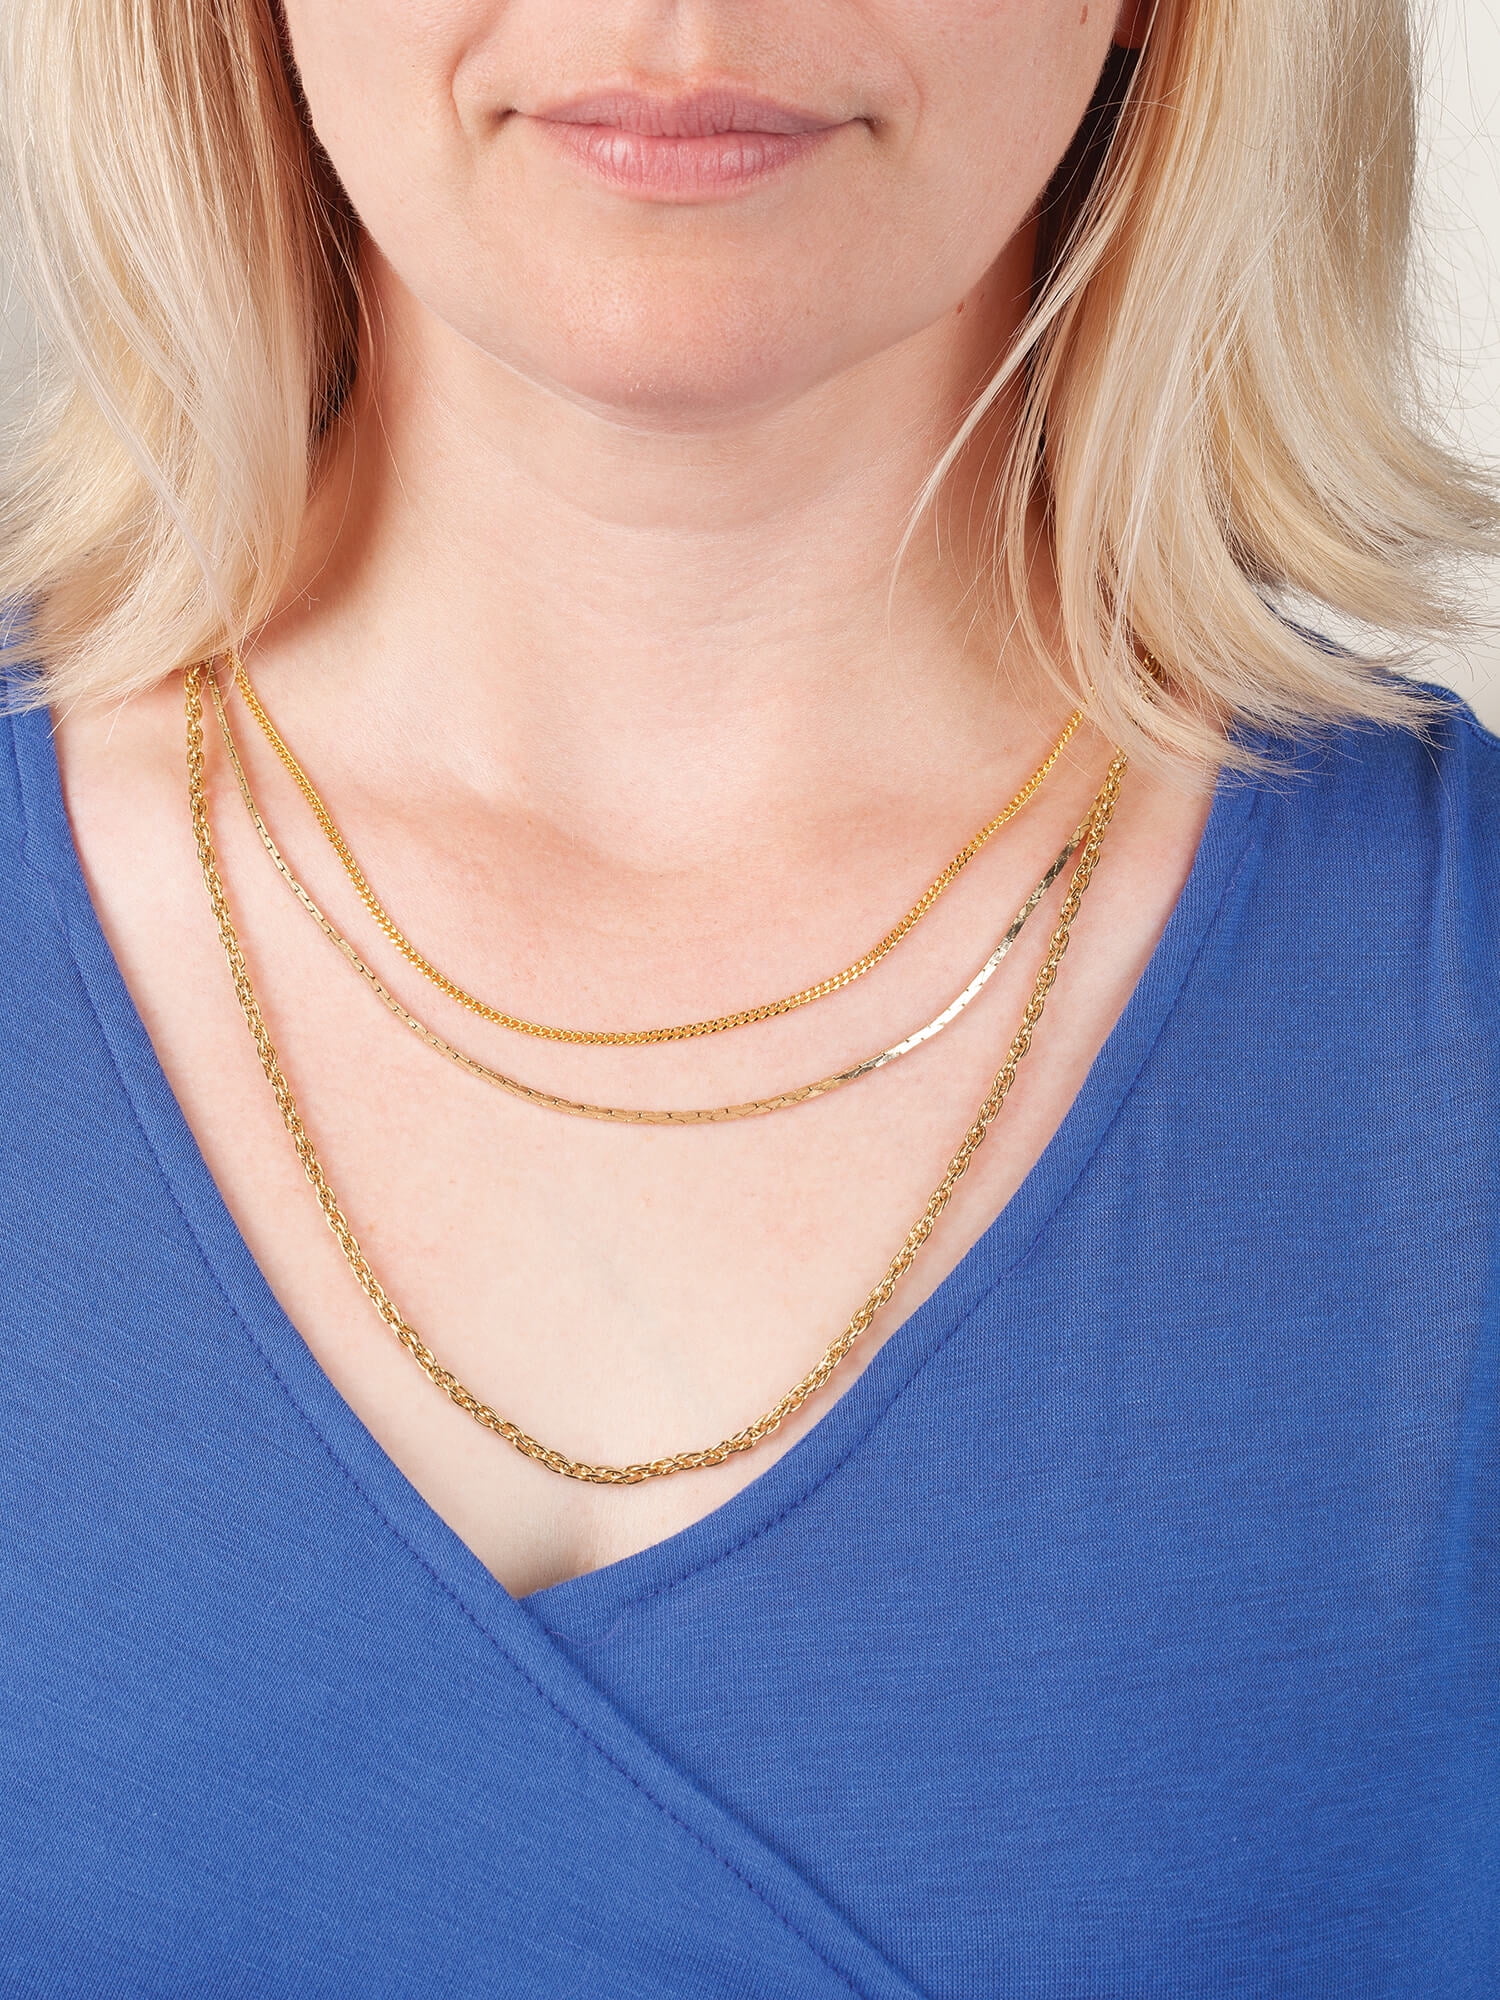 Layered Necklace Detangler - Layer Up to 2 Necklaces - Magnetic Closure  Clasp - Tangle Free Spacer - Stainless Steel